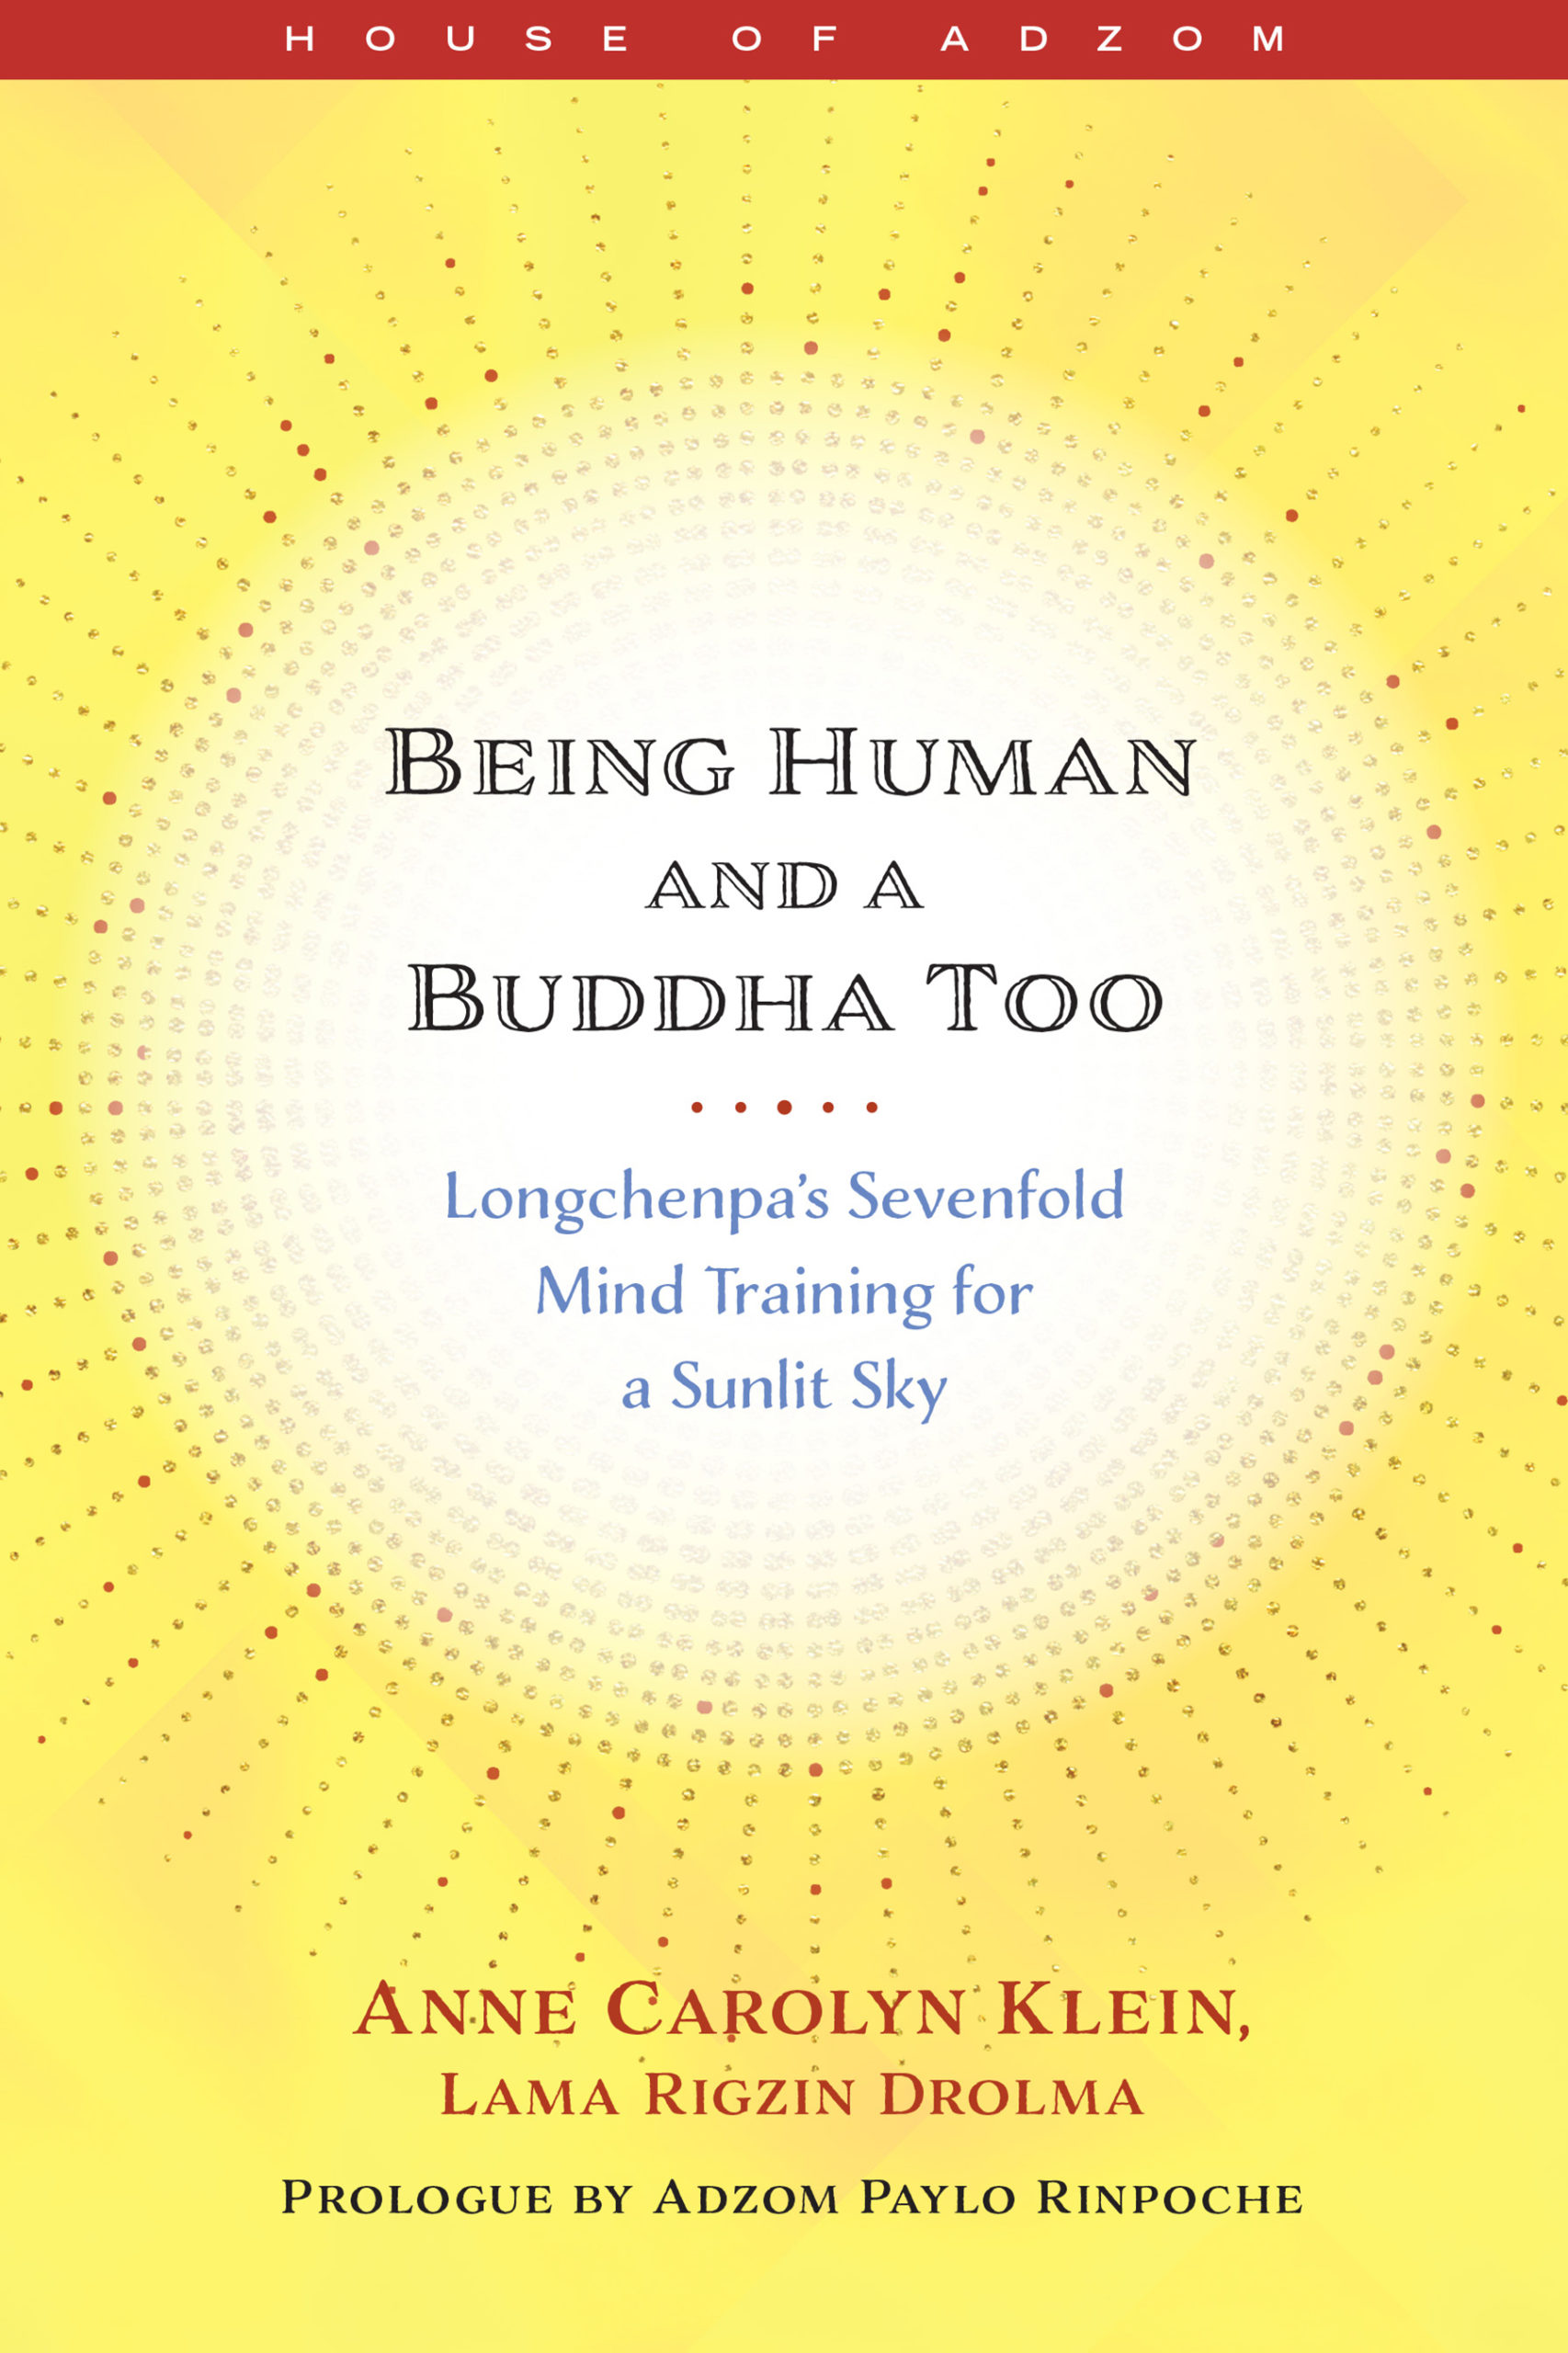 Being Human and a Buddha Too-front.jpg